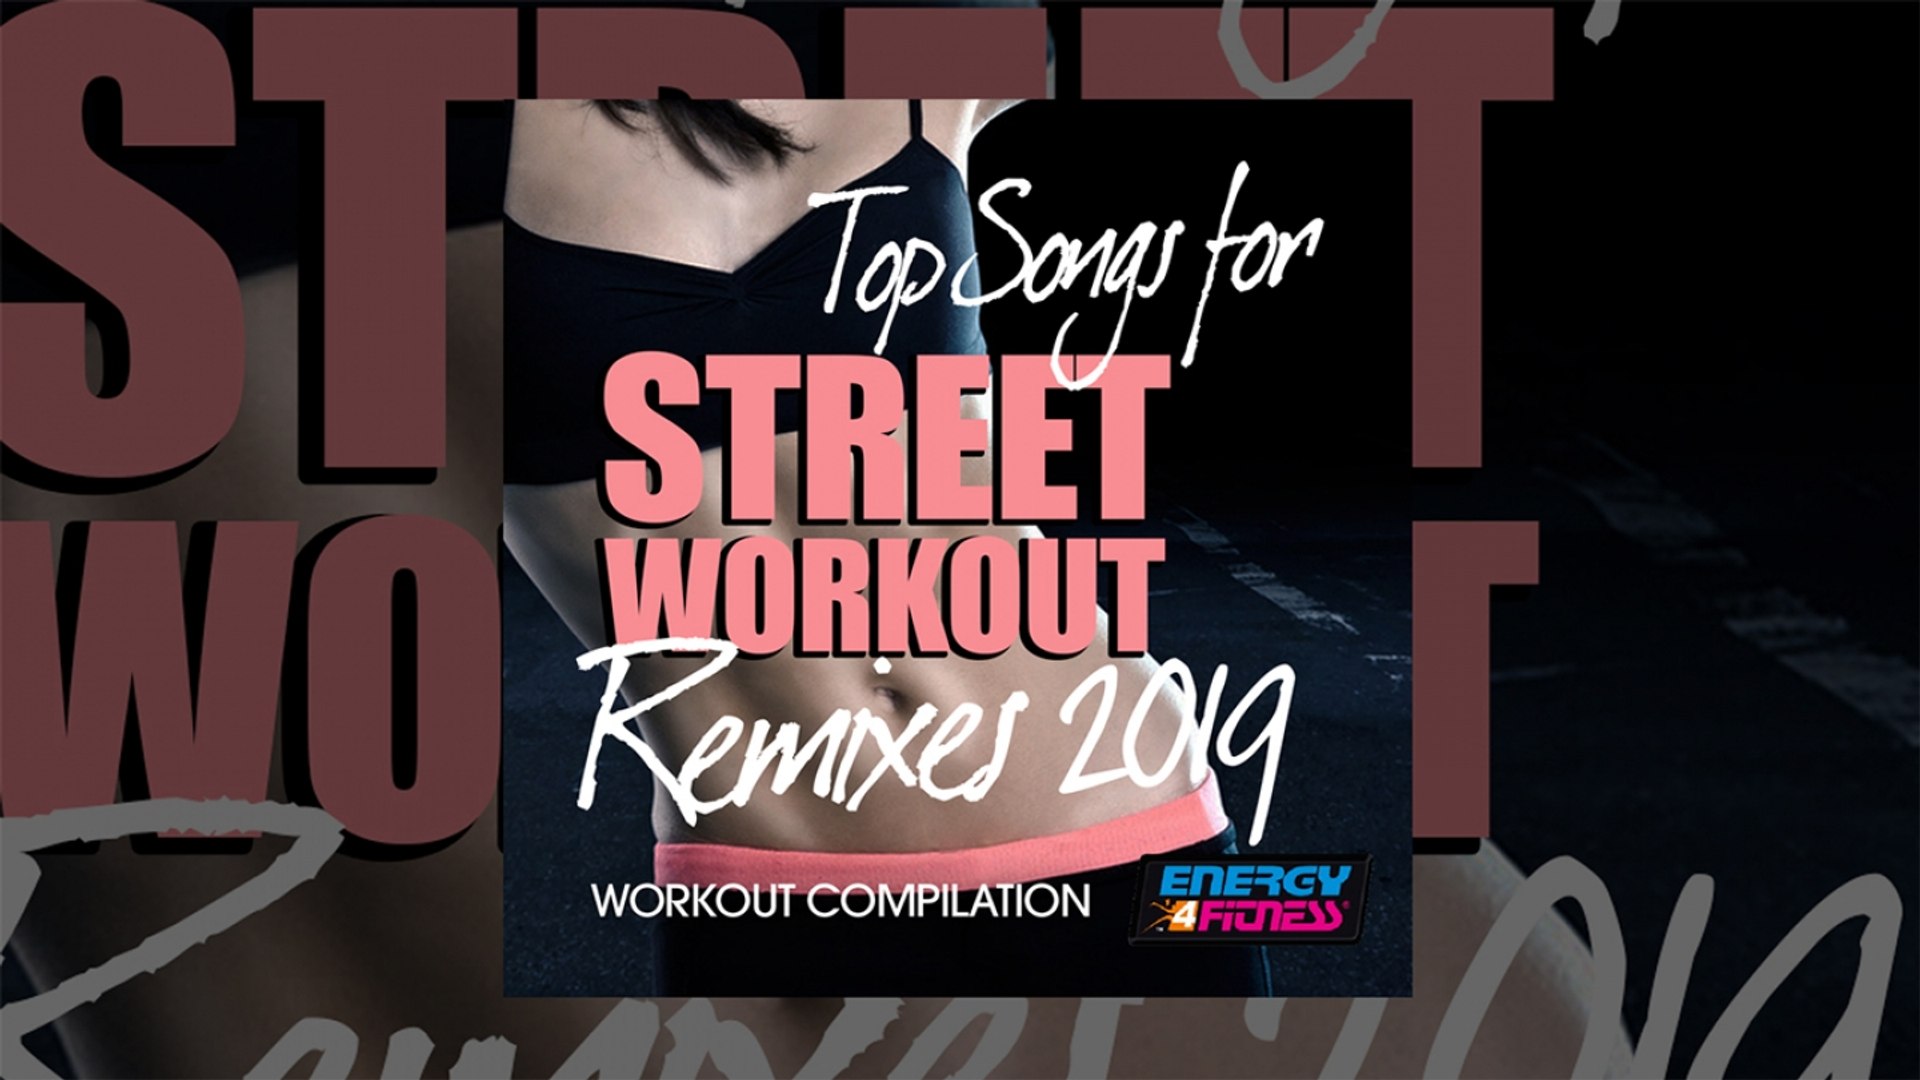 E4F - Top Songs For Street Workout Remixes 2019 Workout Compilation - Fitness & Music 2019